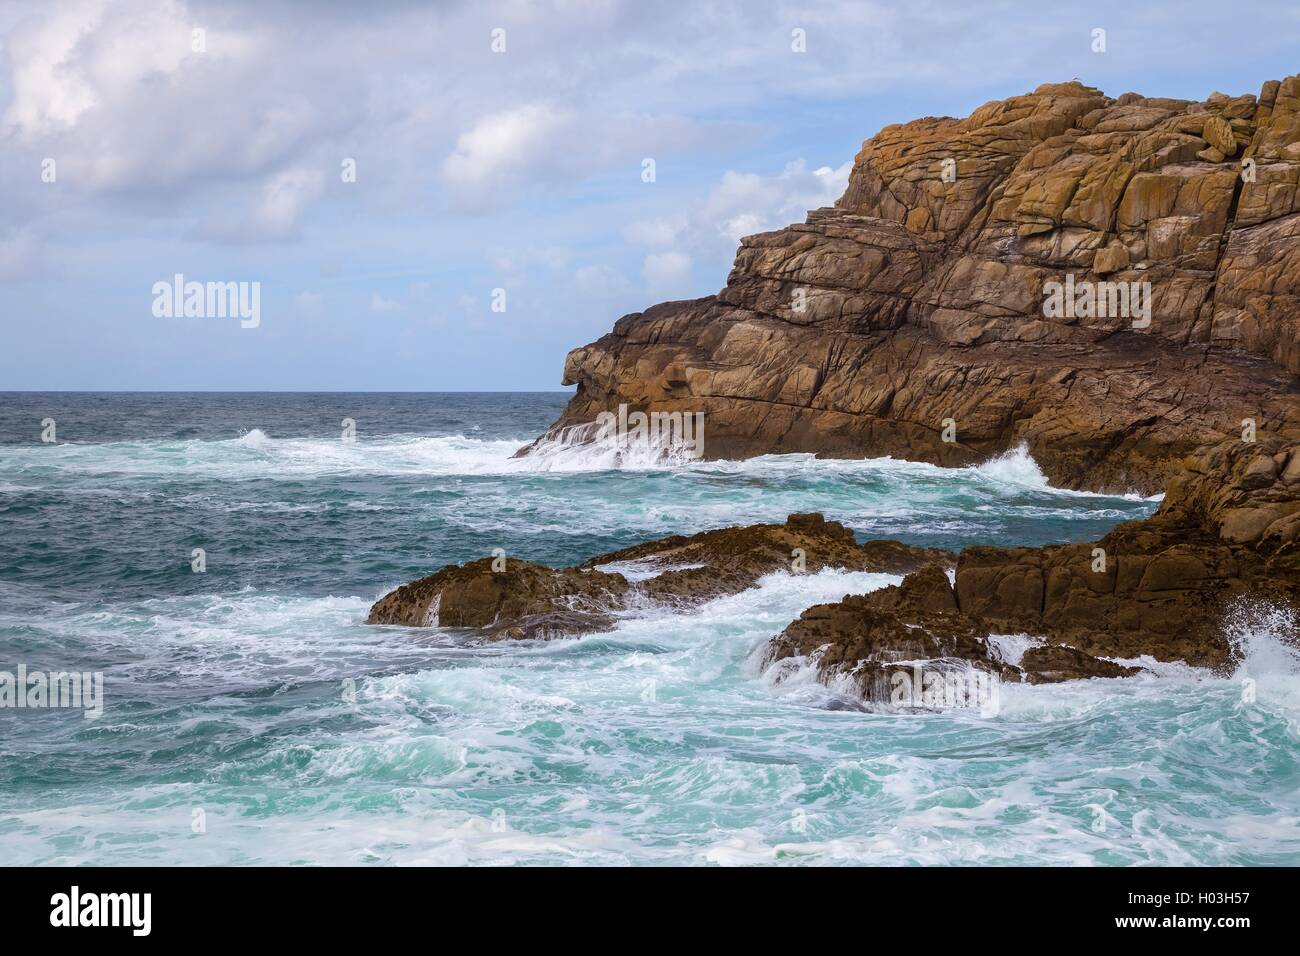 Stormy sea at Hell Bay, Bryher, Isles of Scilly, England Stock Photo